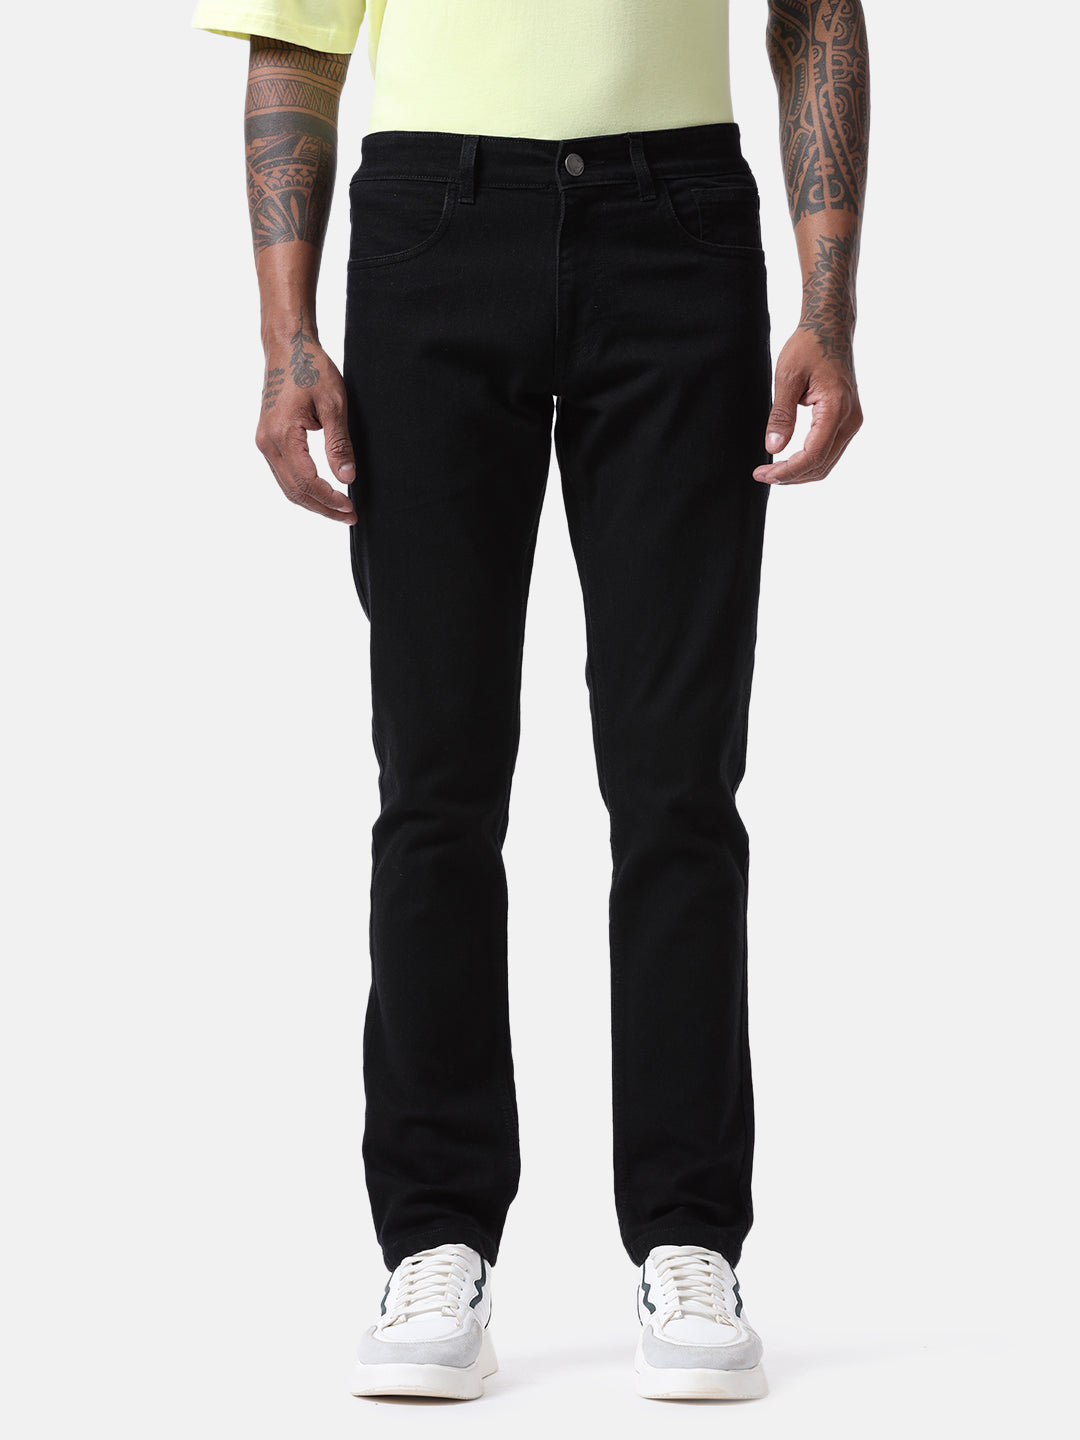 Ace Black Solid Jeans